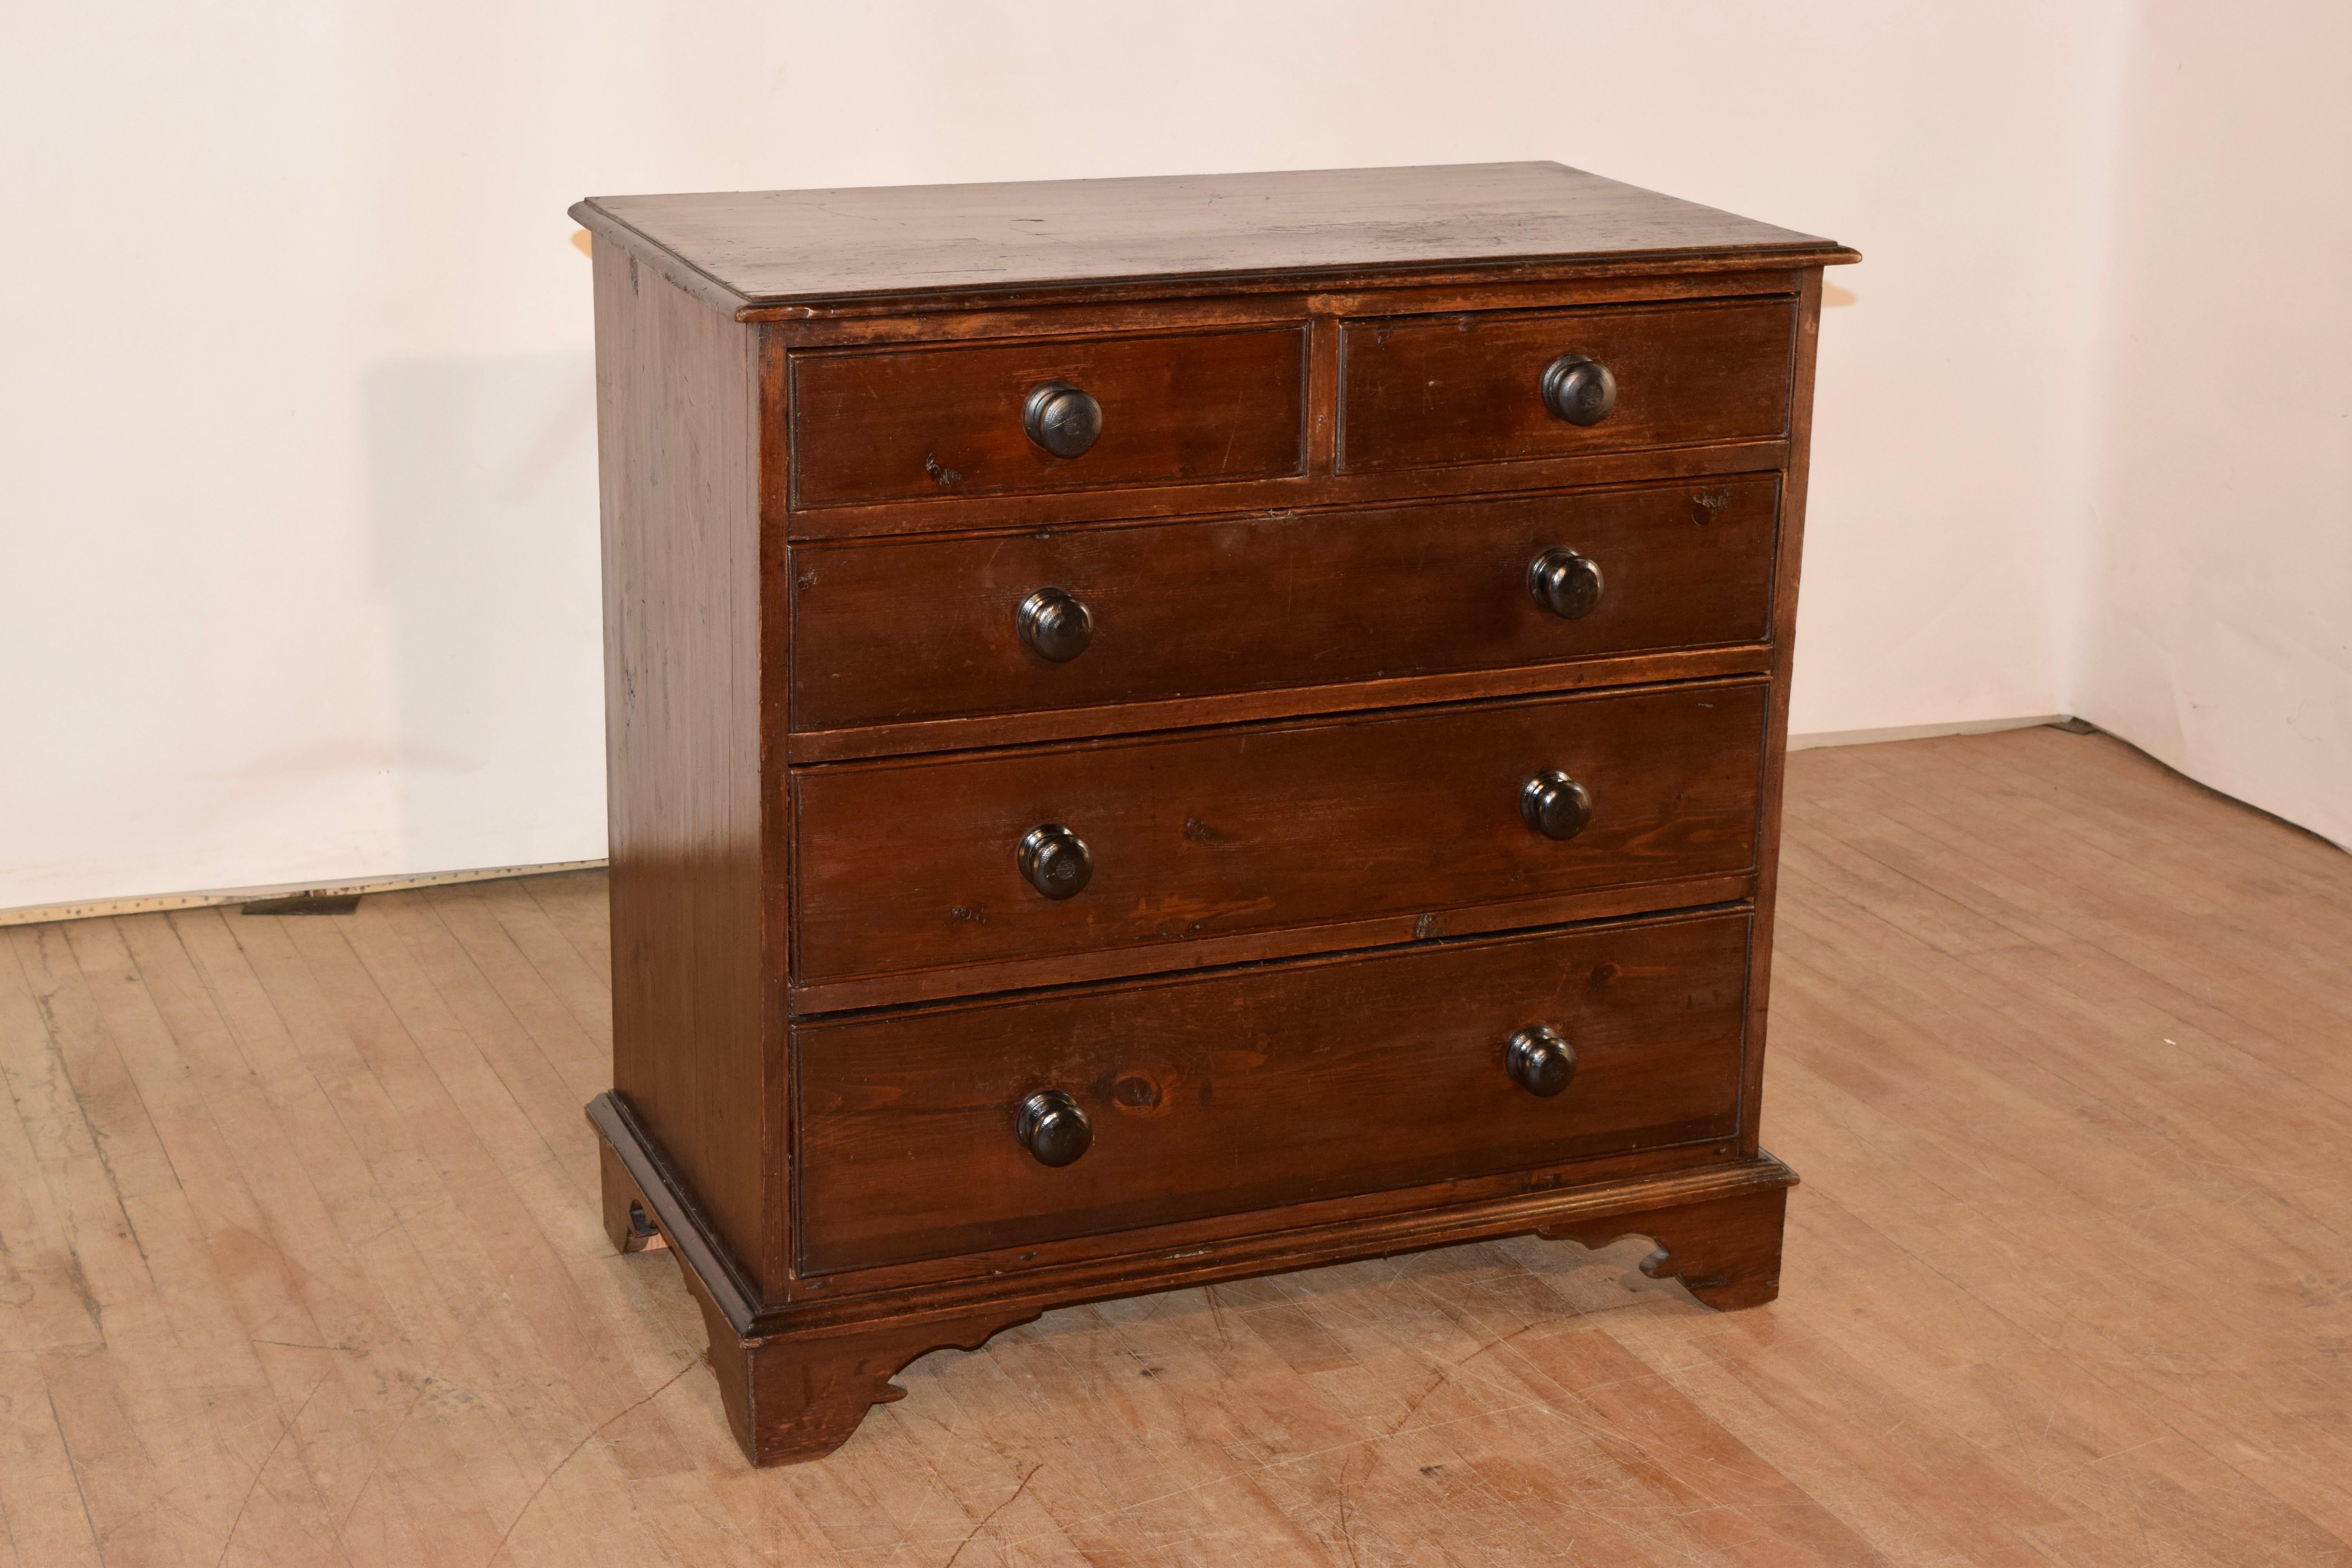 19th century pine chest form England. The top has a beveled edge, following down to two over three drawers. The sides are simple and the piece is raised on bracket feet.